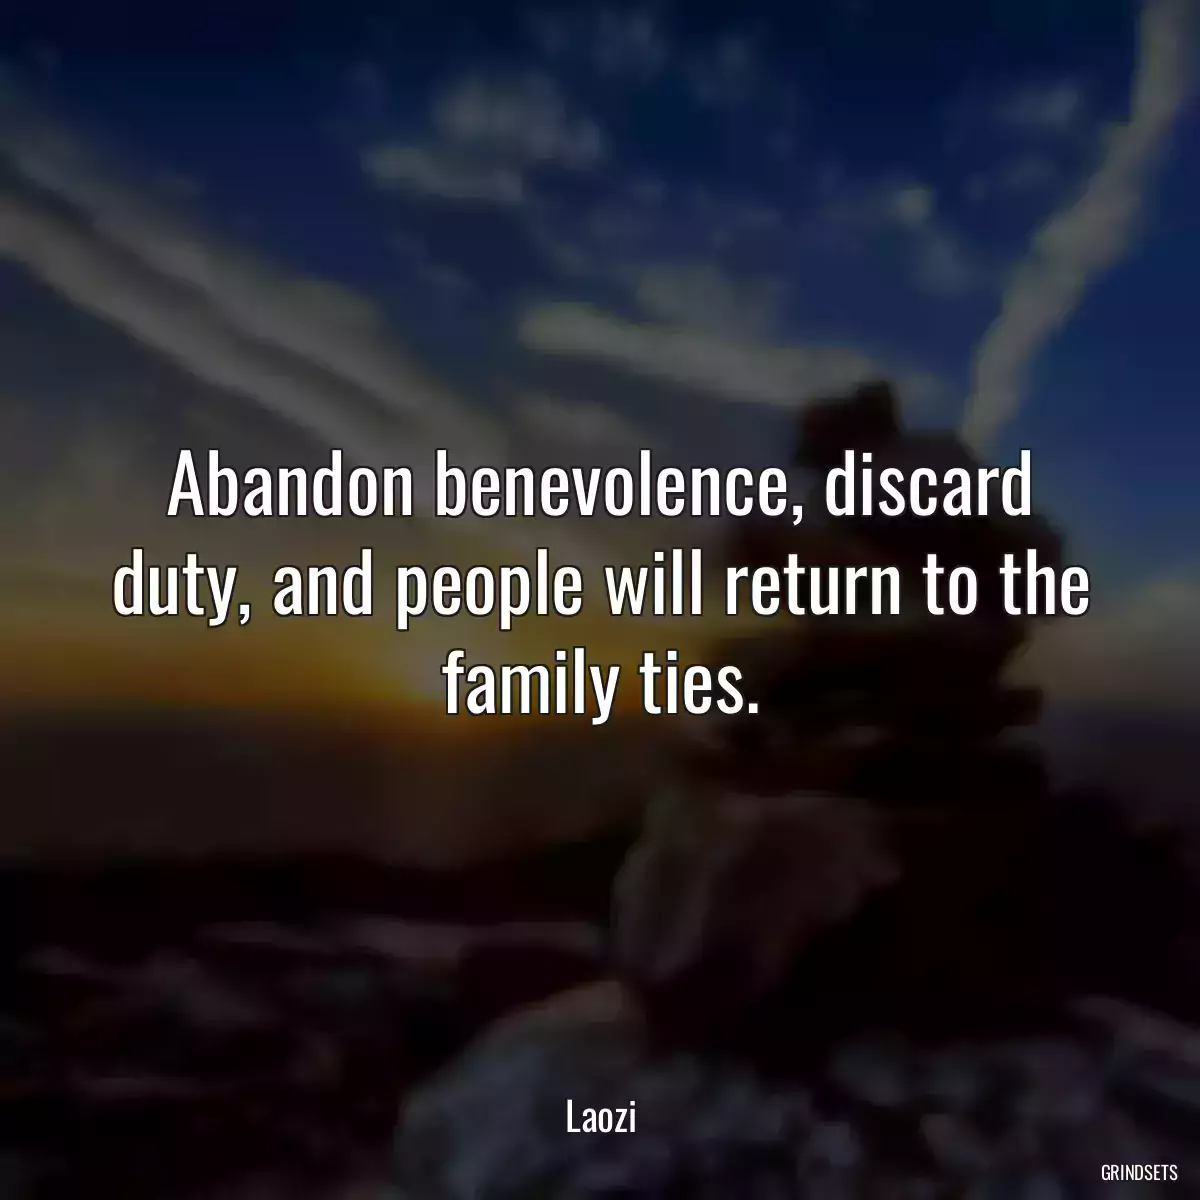 Abandon benevolence, discard duty, and people will return to the family ties.